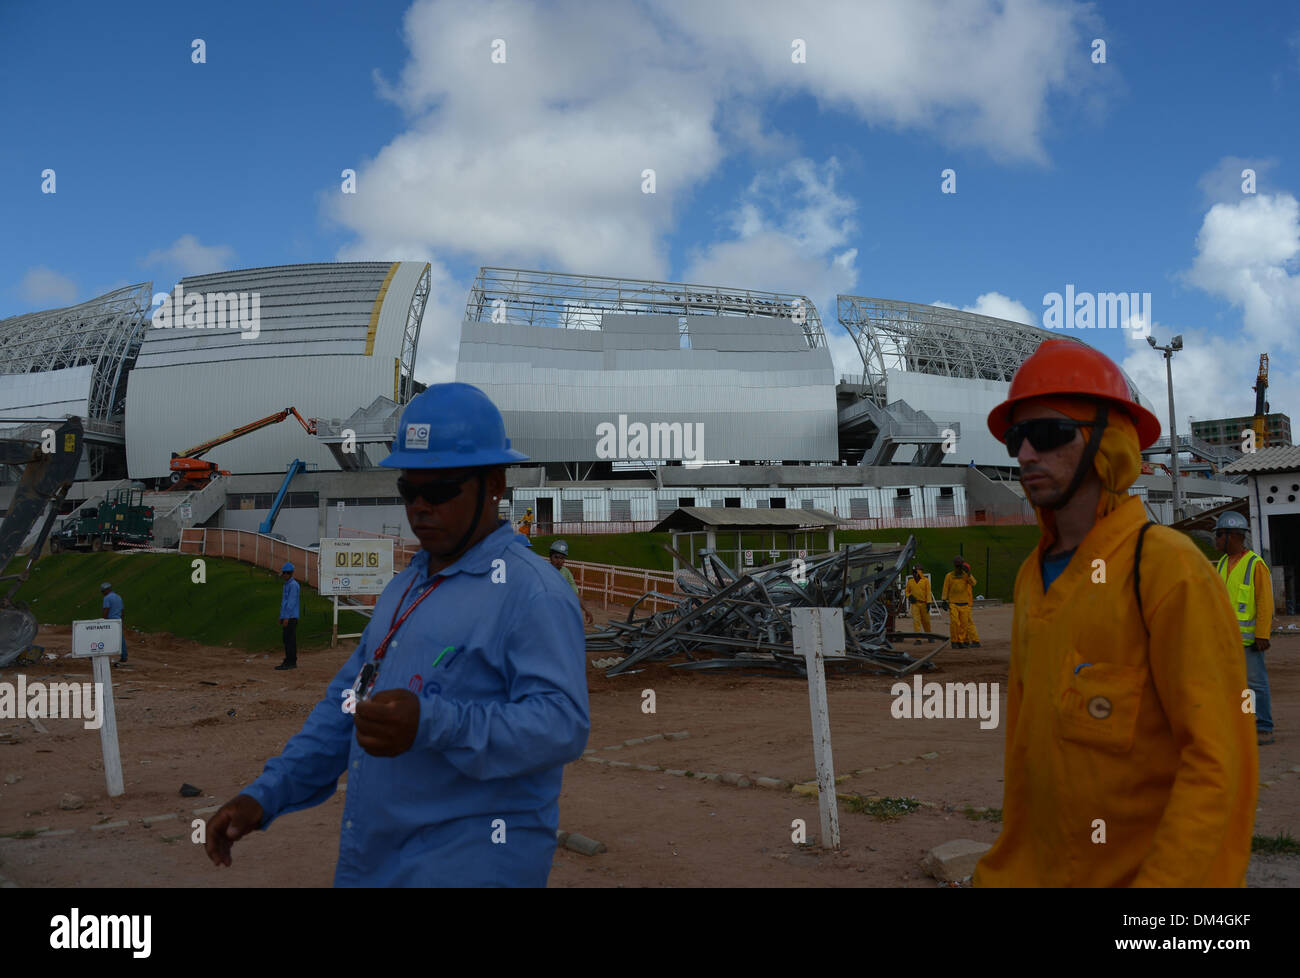 Natal, Brazil. 08th Dec, 2013. Construction workers are pictured at the construction site of 'Arena das Dunas' in Natal, Brazil, 08 December 2013. Photo: MARCUS BRANDT/dpa/Alamy Live News Stock Photo